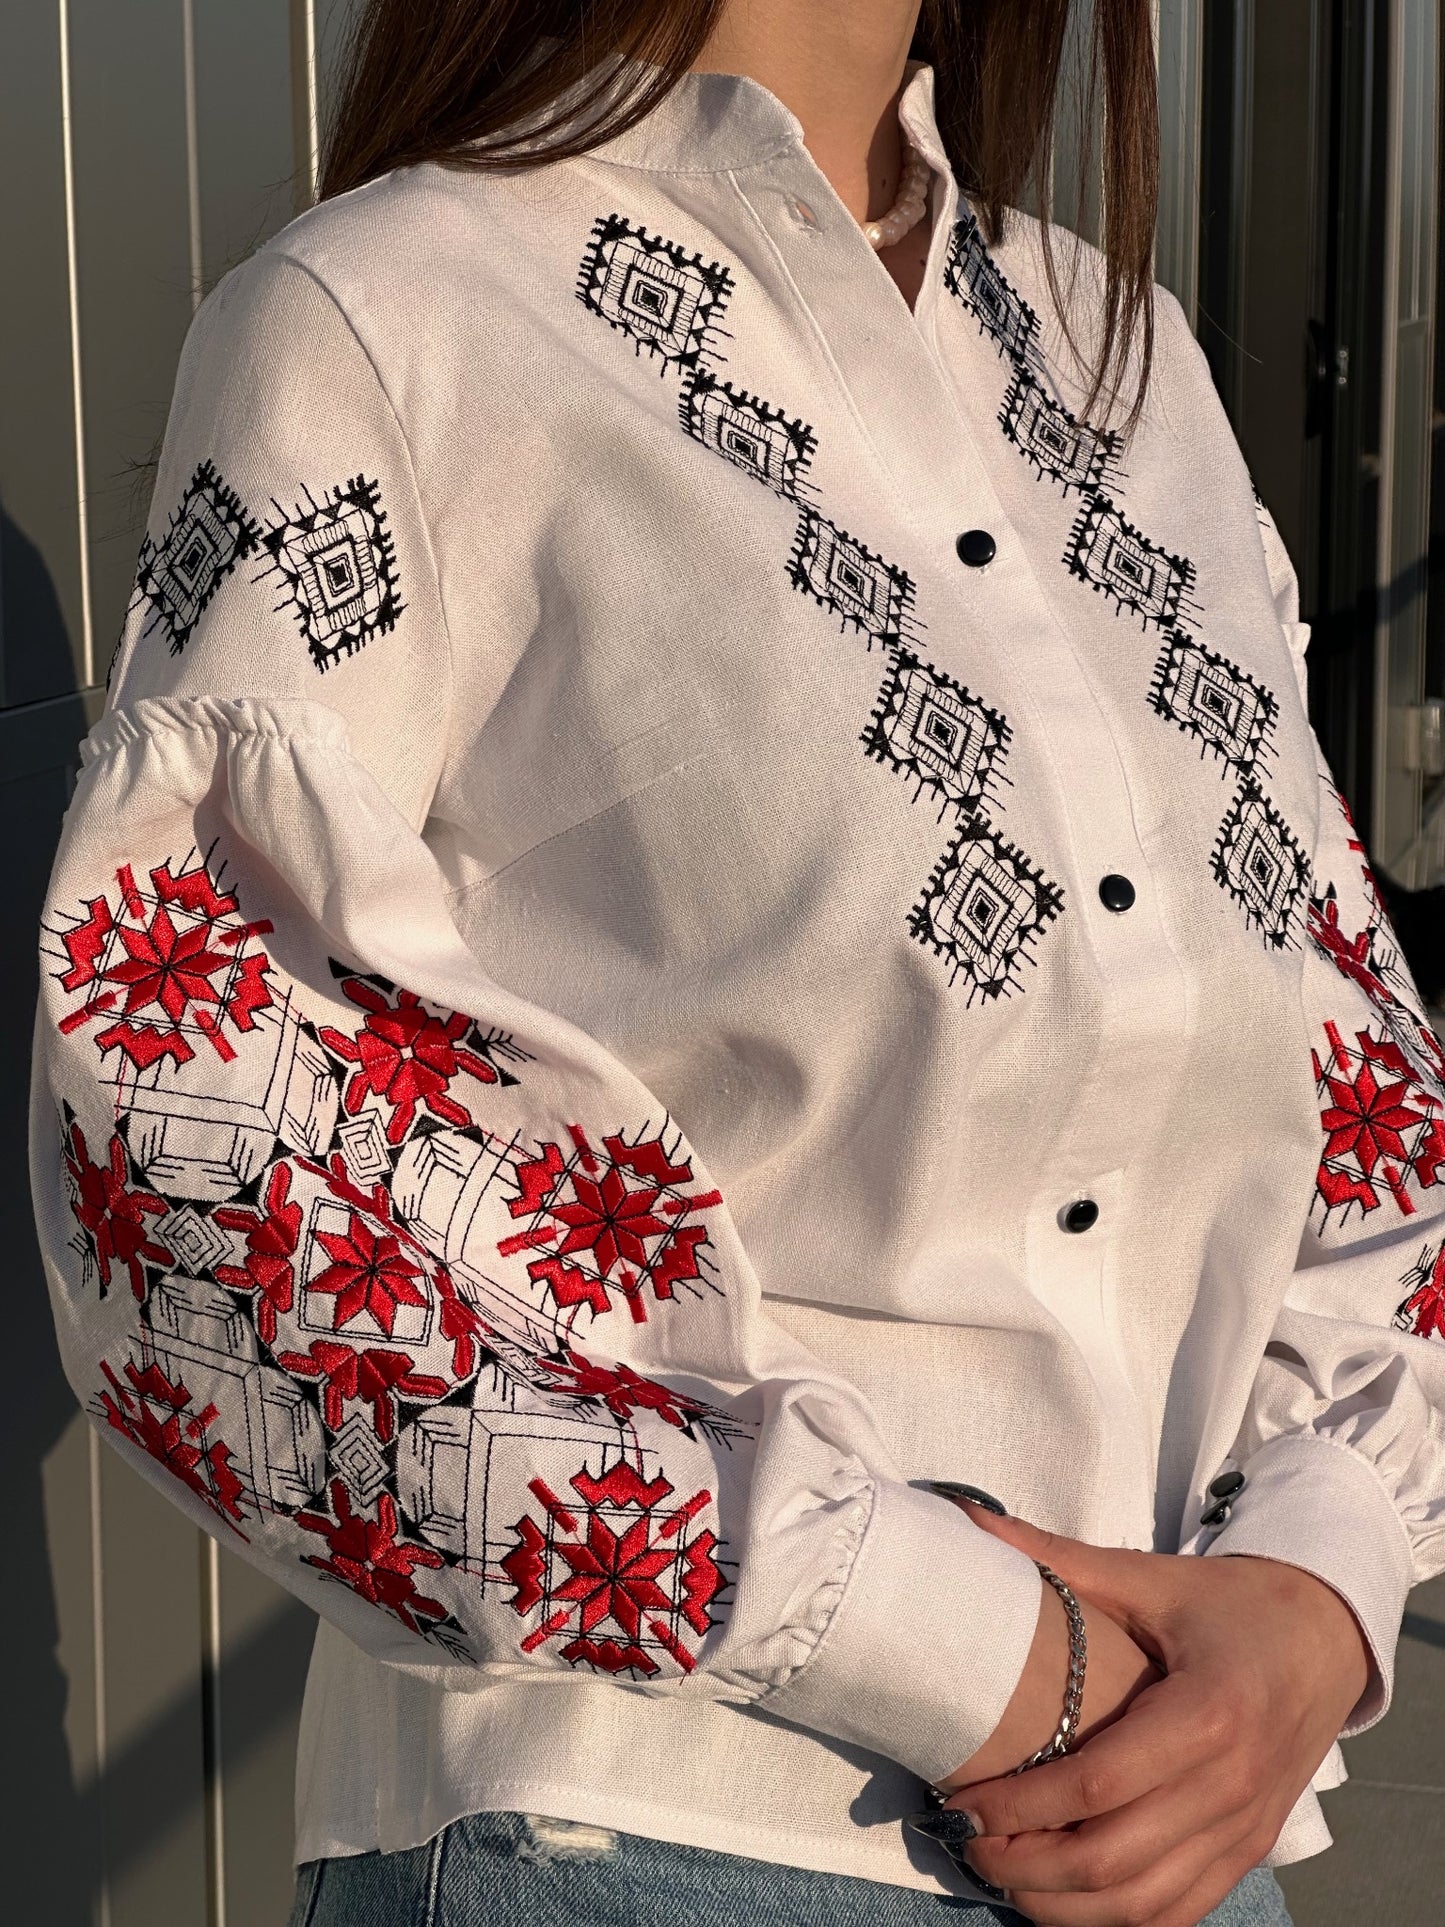 The White Women's Shirt with Red and Black Embroidery